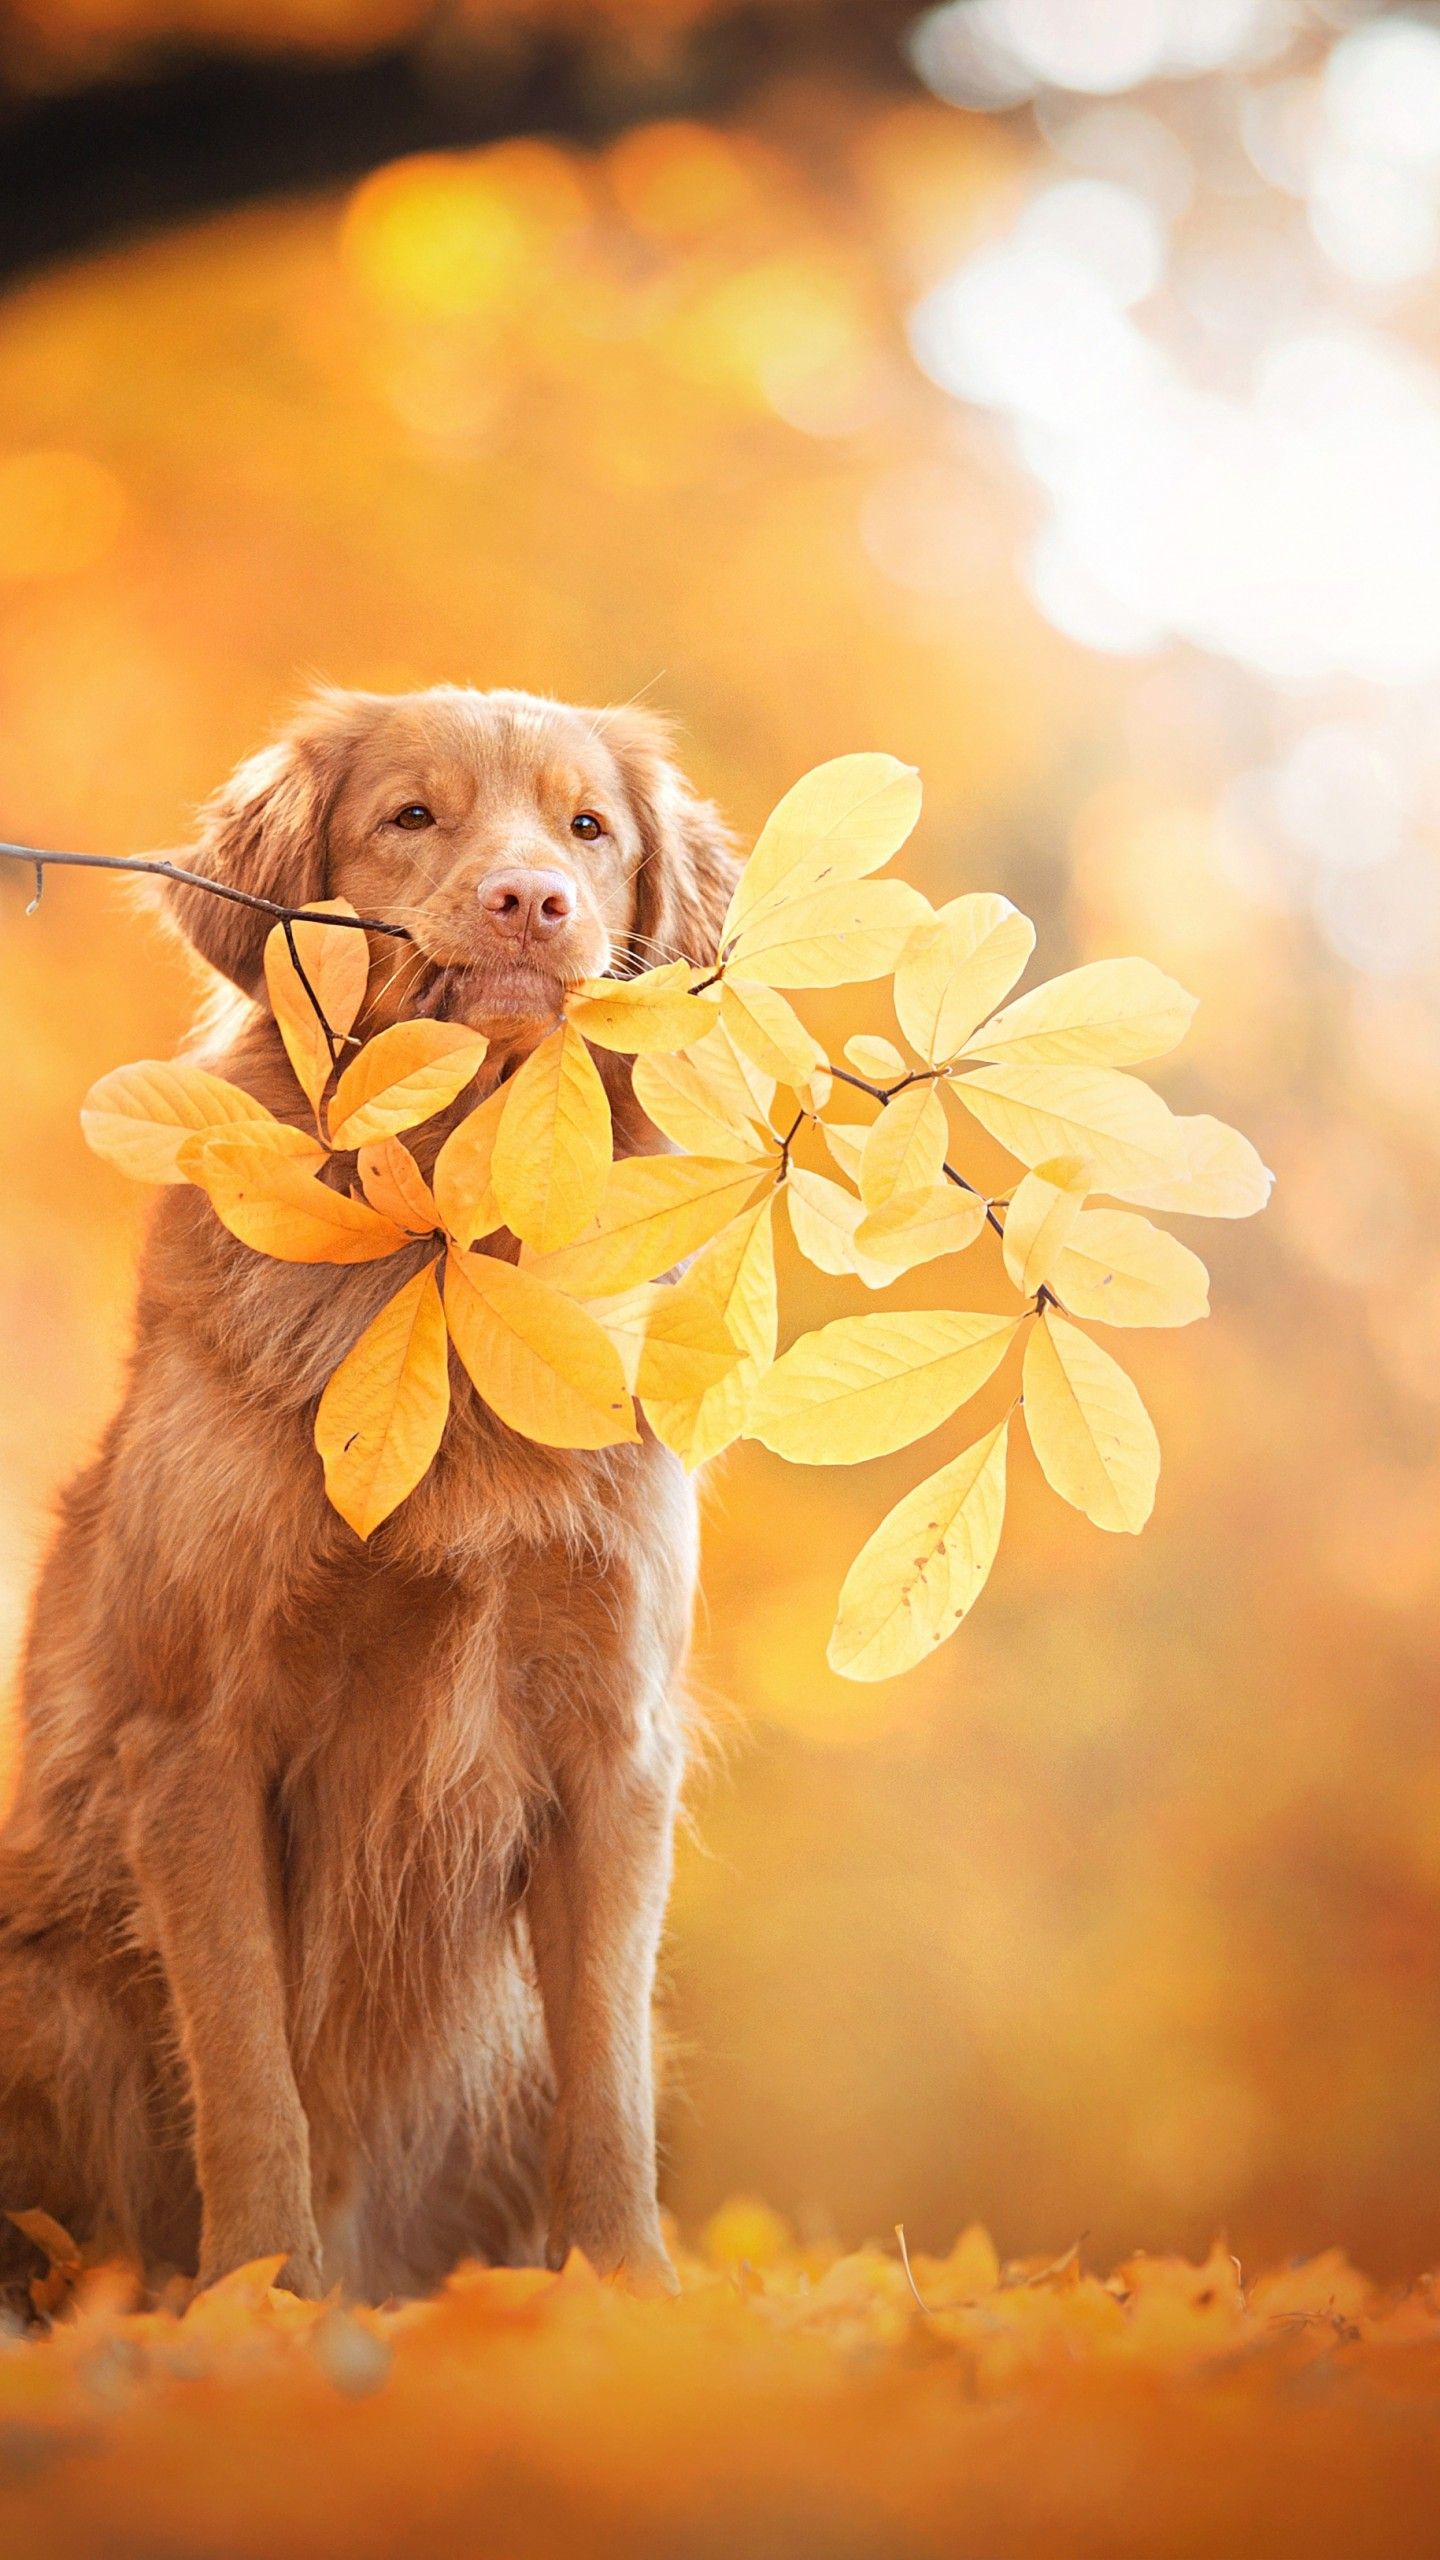 Wallpaper Golden Retriever, Autumn leaves, Foliage, 4K, Animals,. Wallpaper for iPhone, Android, Mobile and Desktop